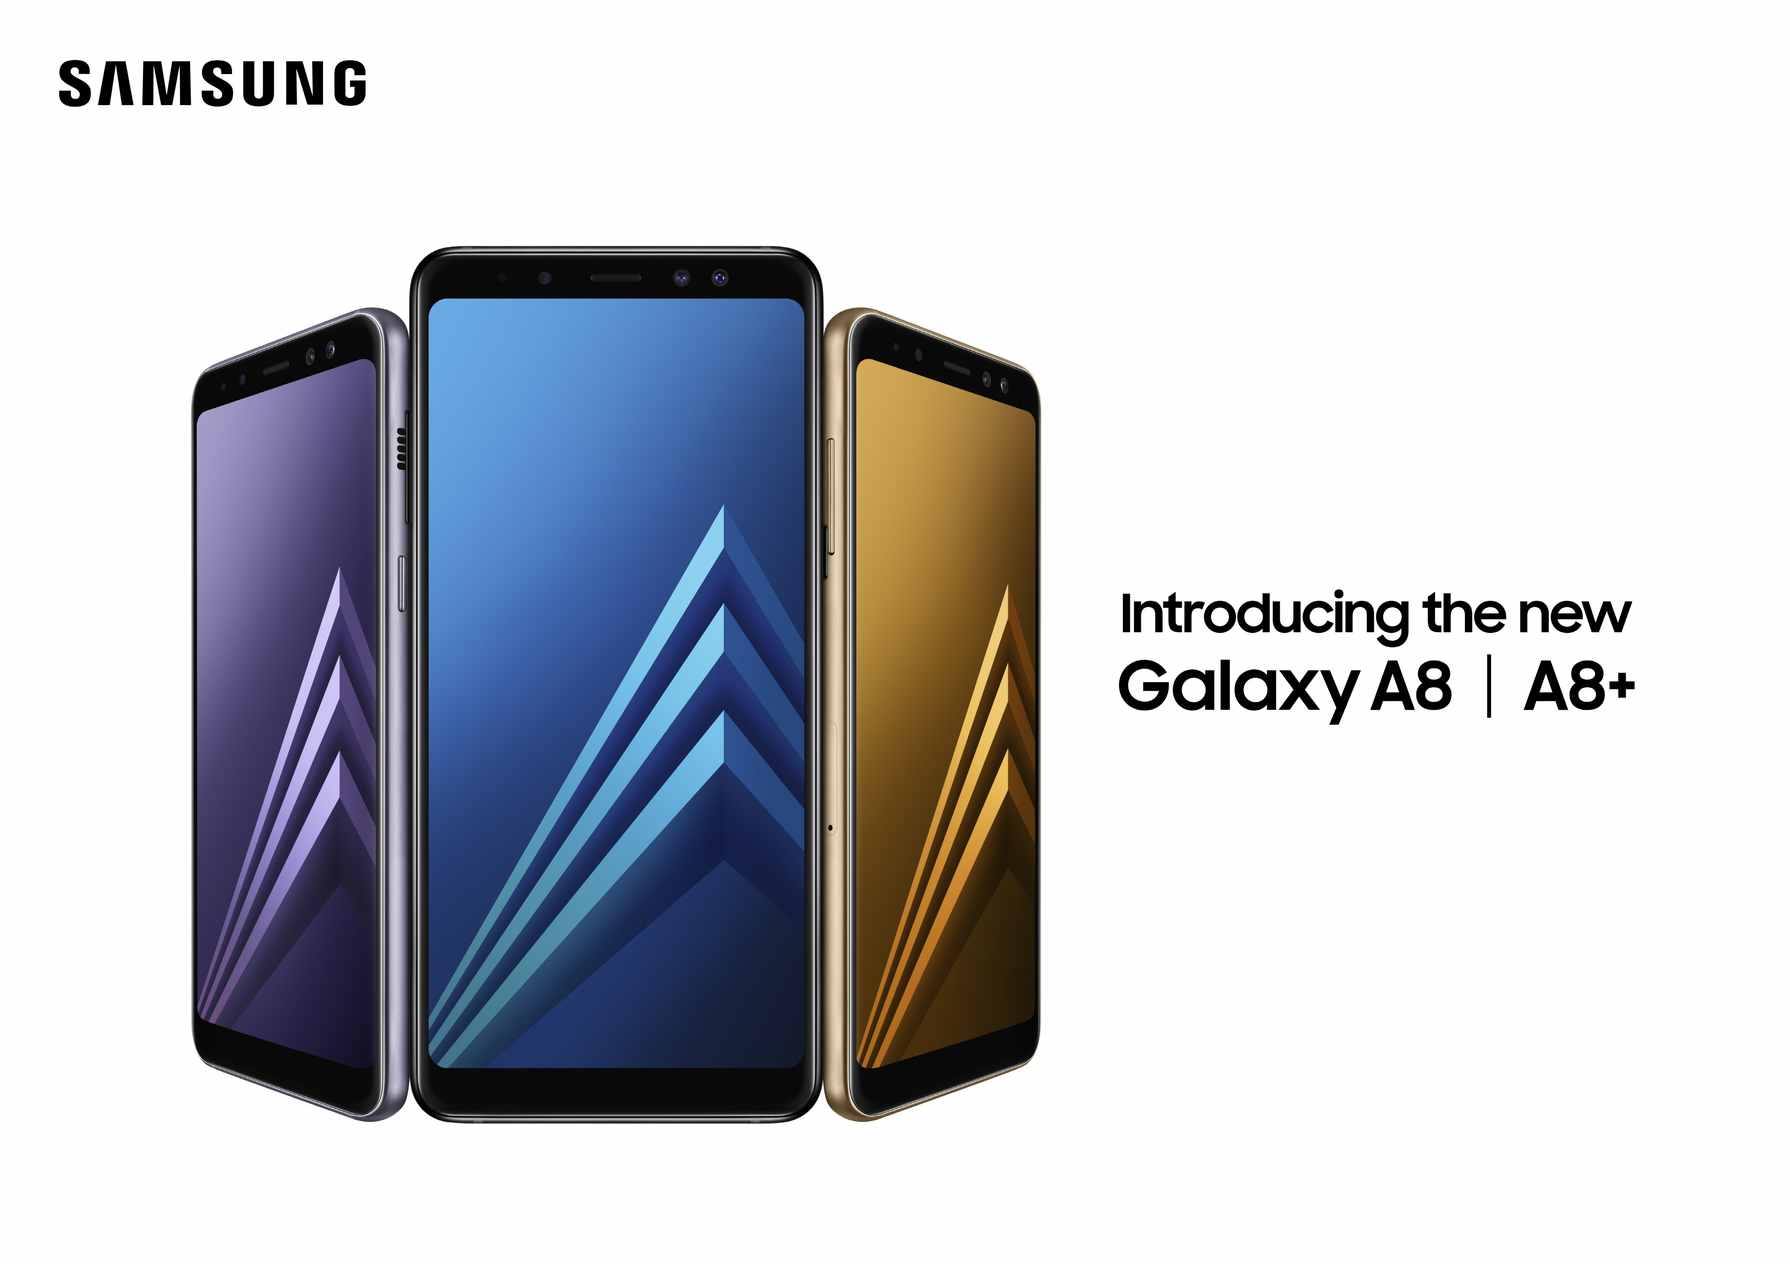 Samsung Will Launch The A8+ (A8 Plus) On January 10 In India